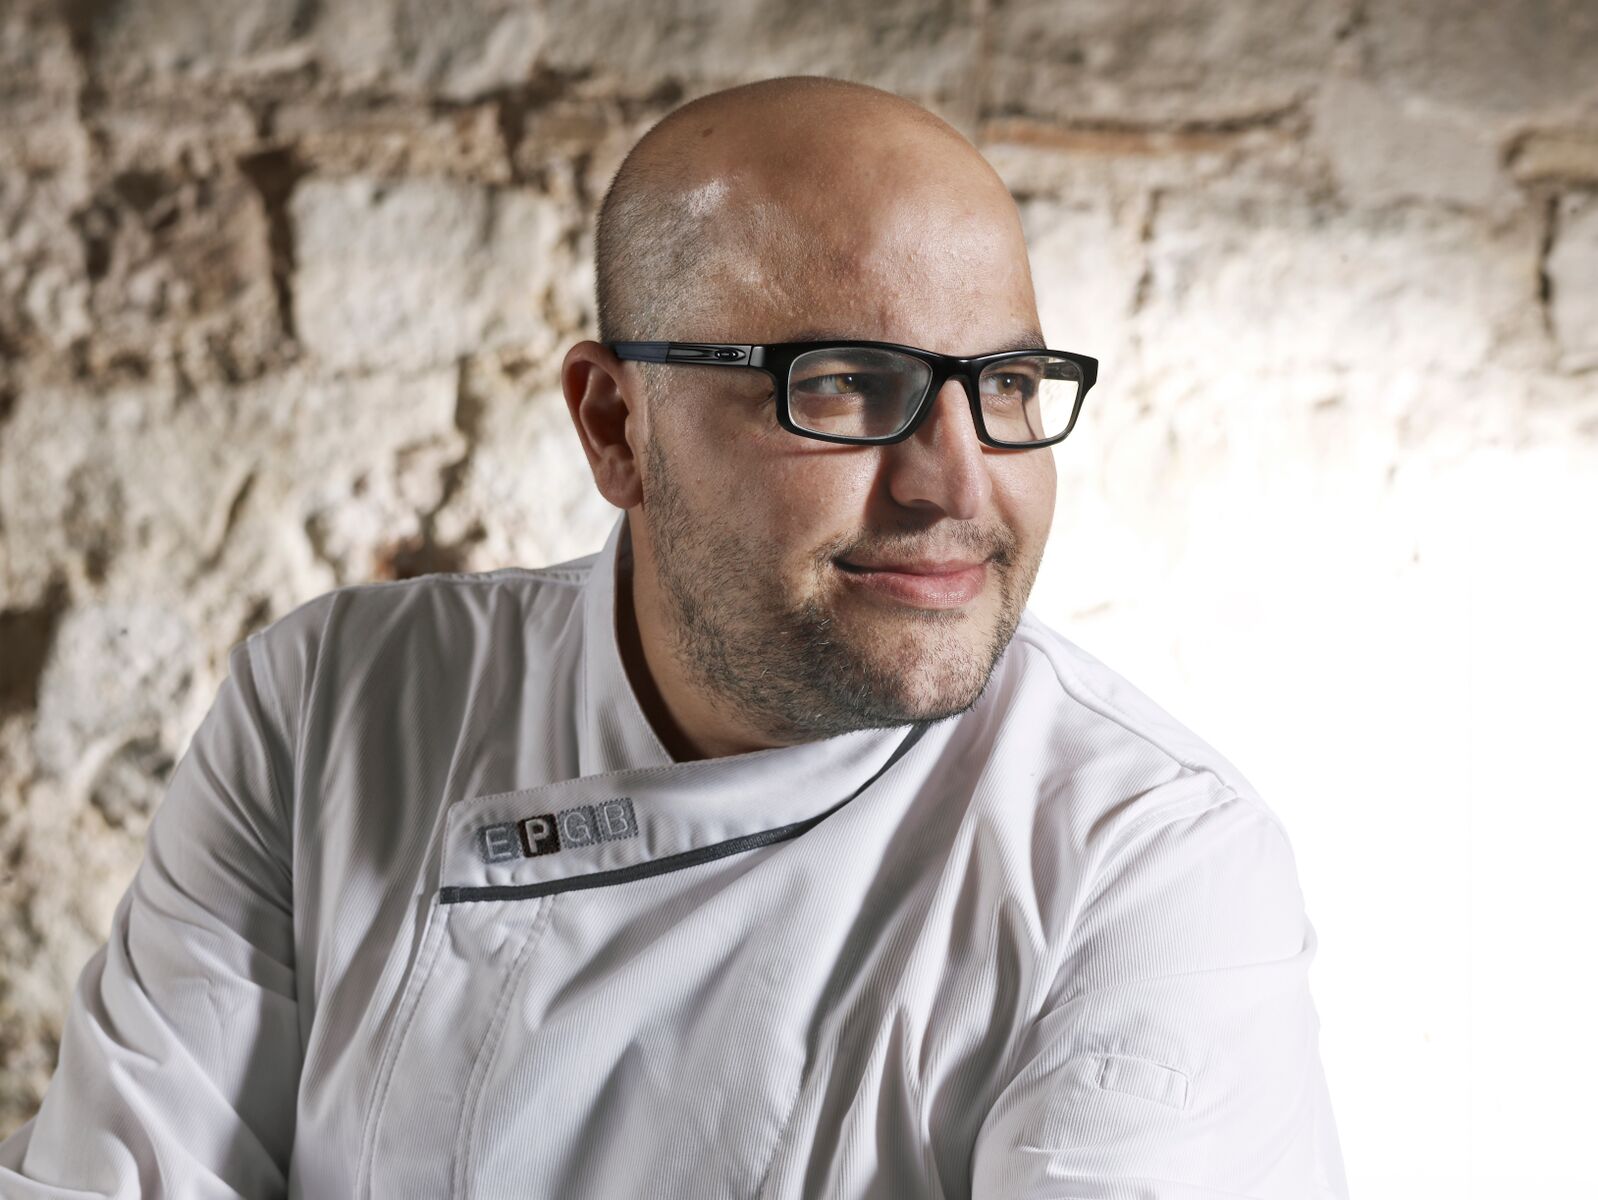 Award-winning chef, author to open bakery at Downtown Doral